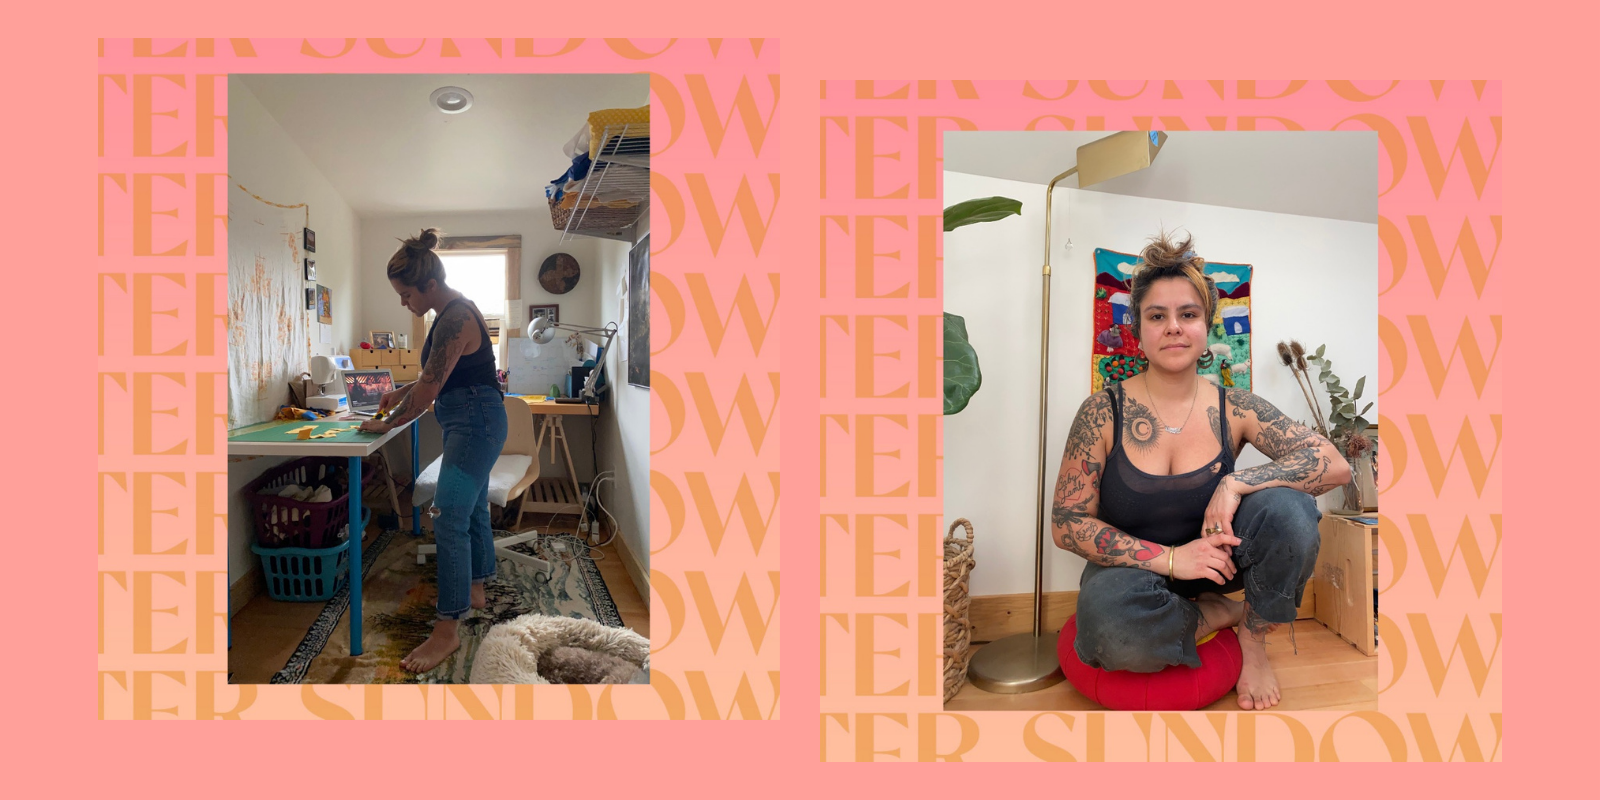 Camila, creator of The Pause Project, poses in two different photos: one she is standing and sewing, the other she is kneeling and facing the camera. Both images are on a peach background.